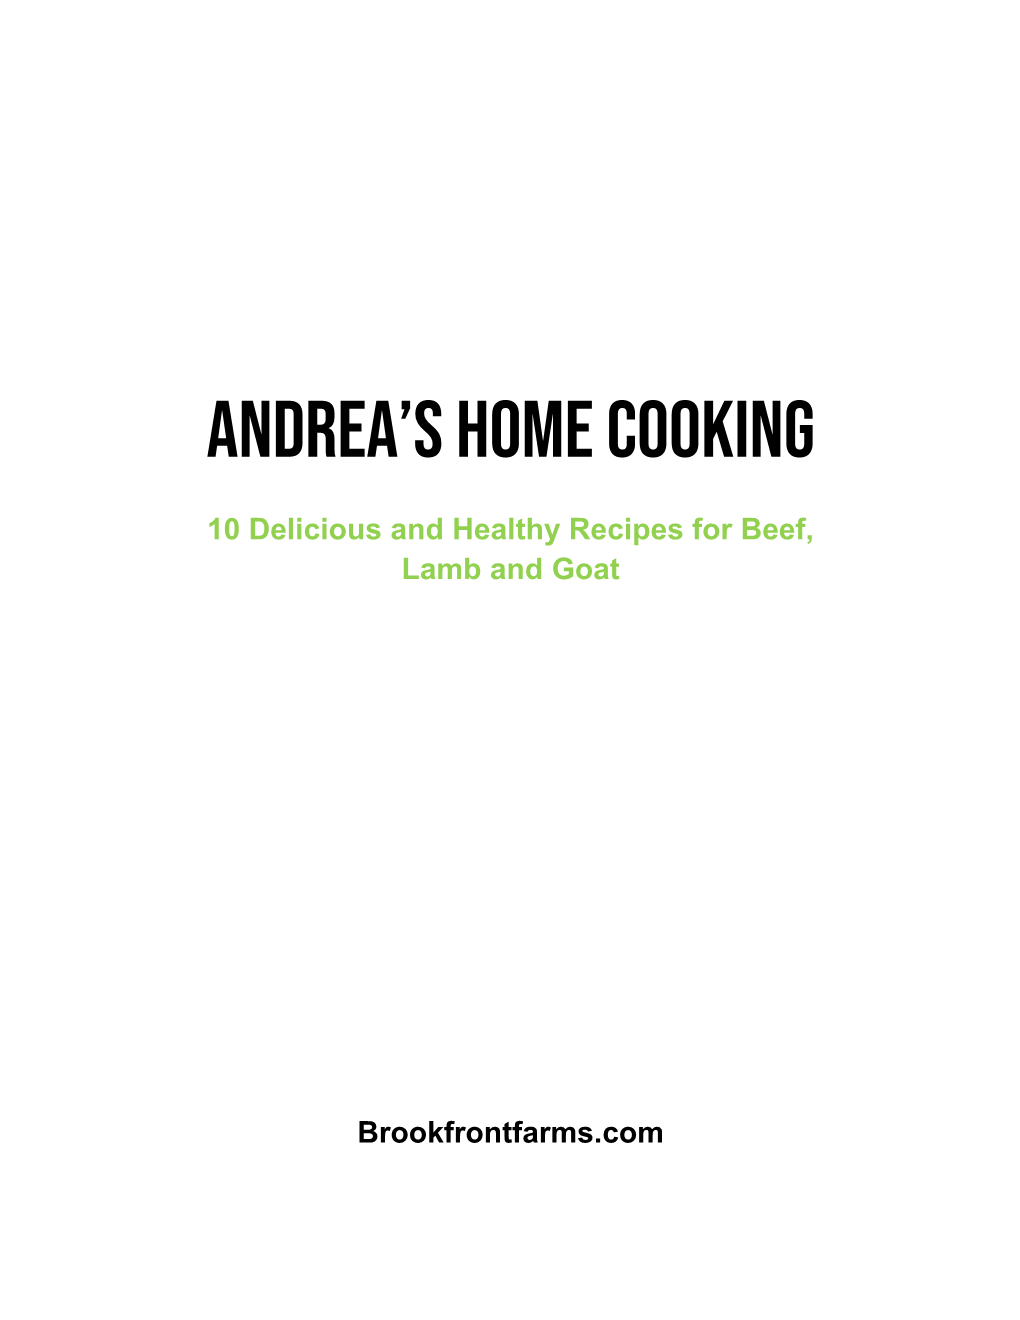 Andrea's Home Cooking